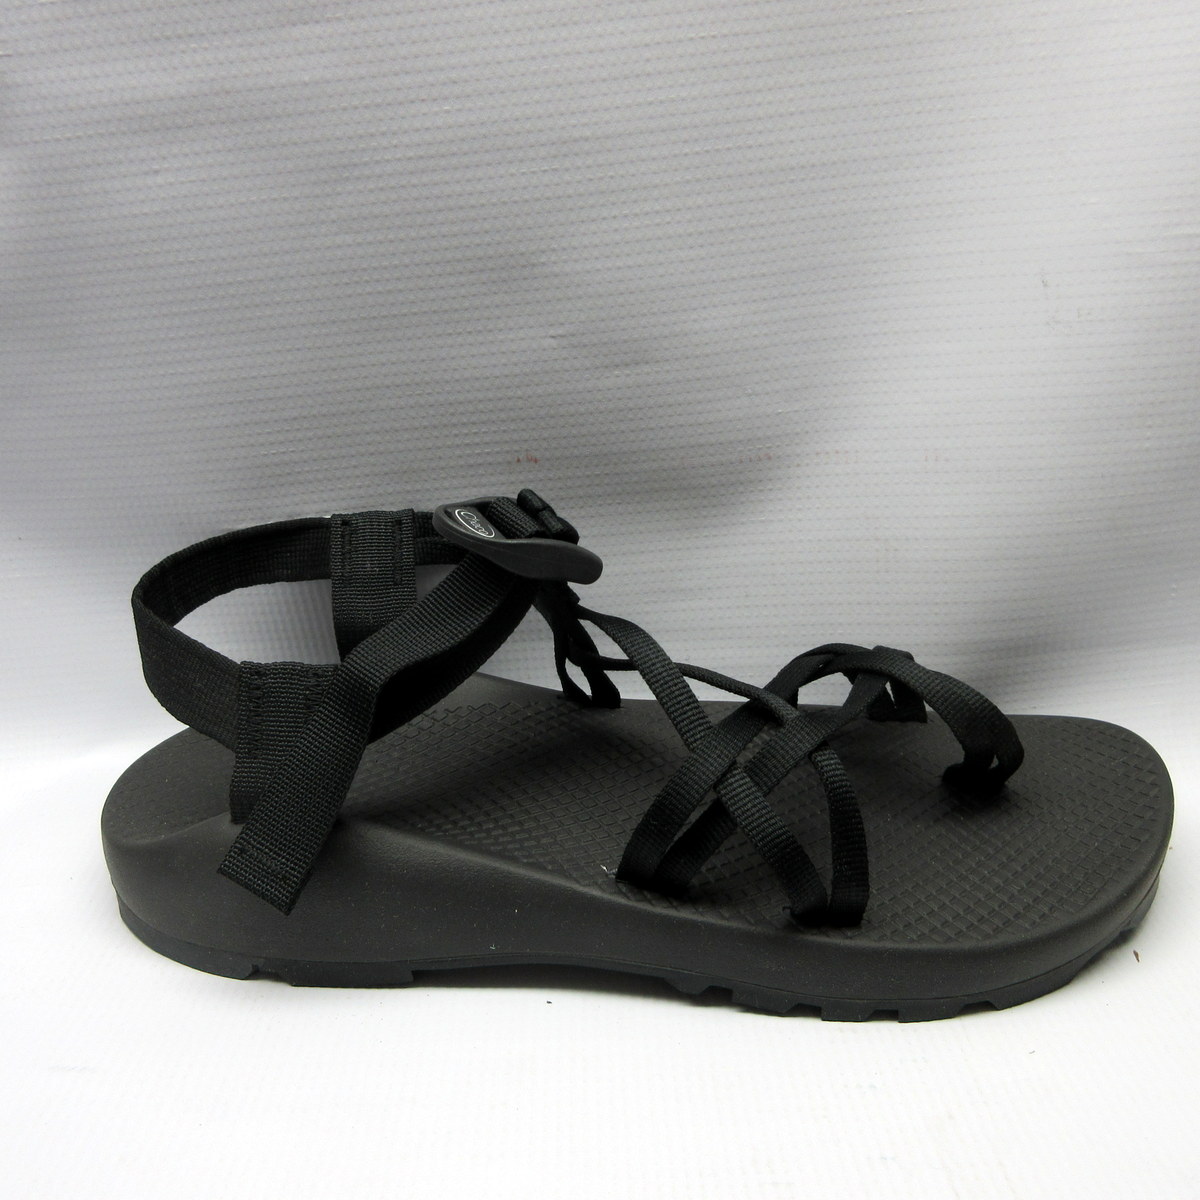 chacos zx2 black